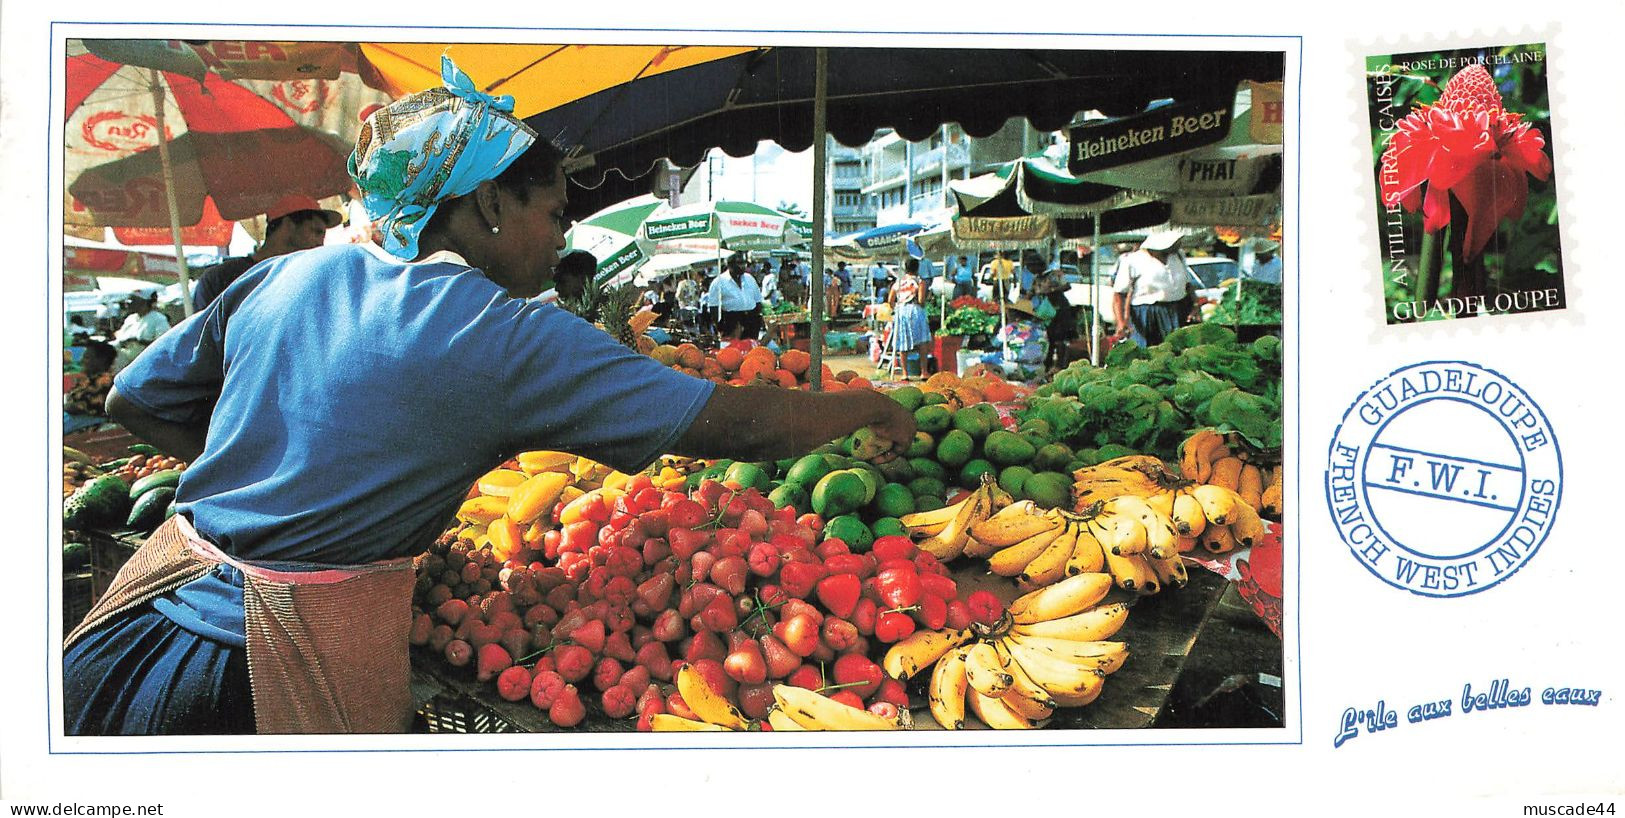 GUADELOUPE - MARCHE AUX FRUITS A BASSE TERRE - Basse Terre